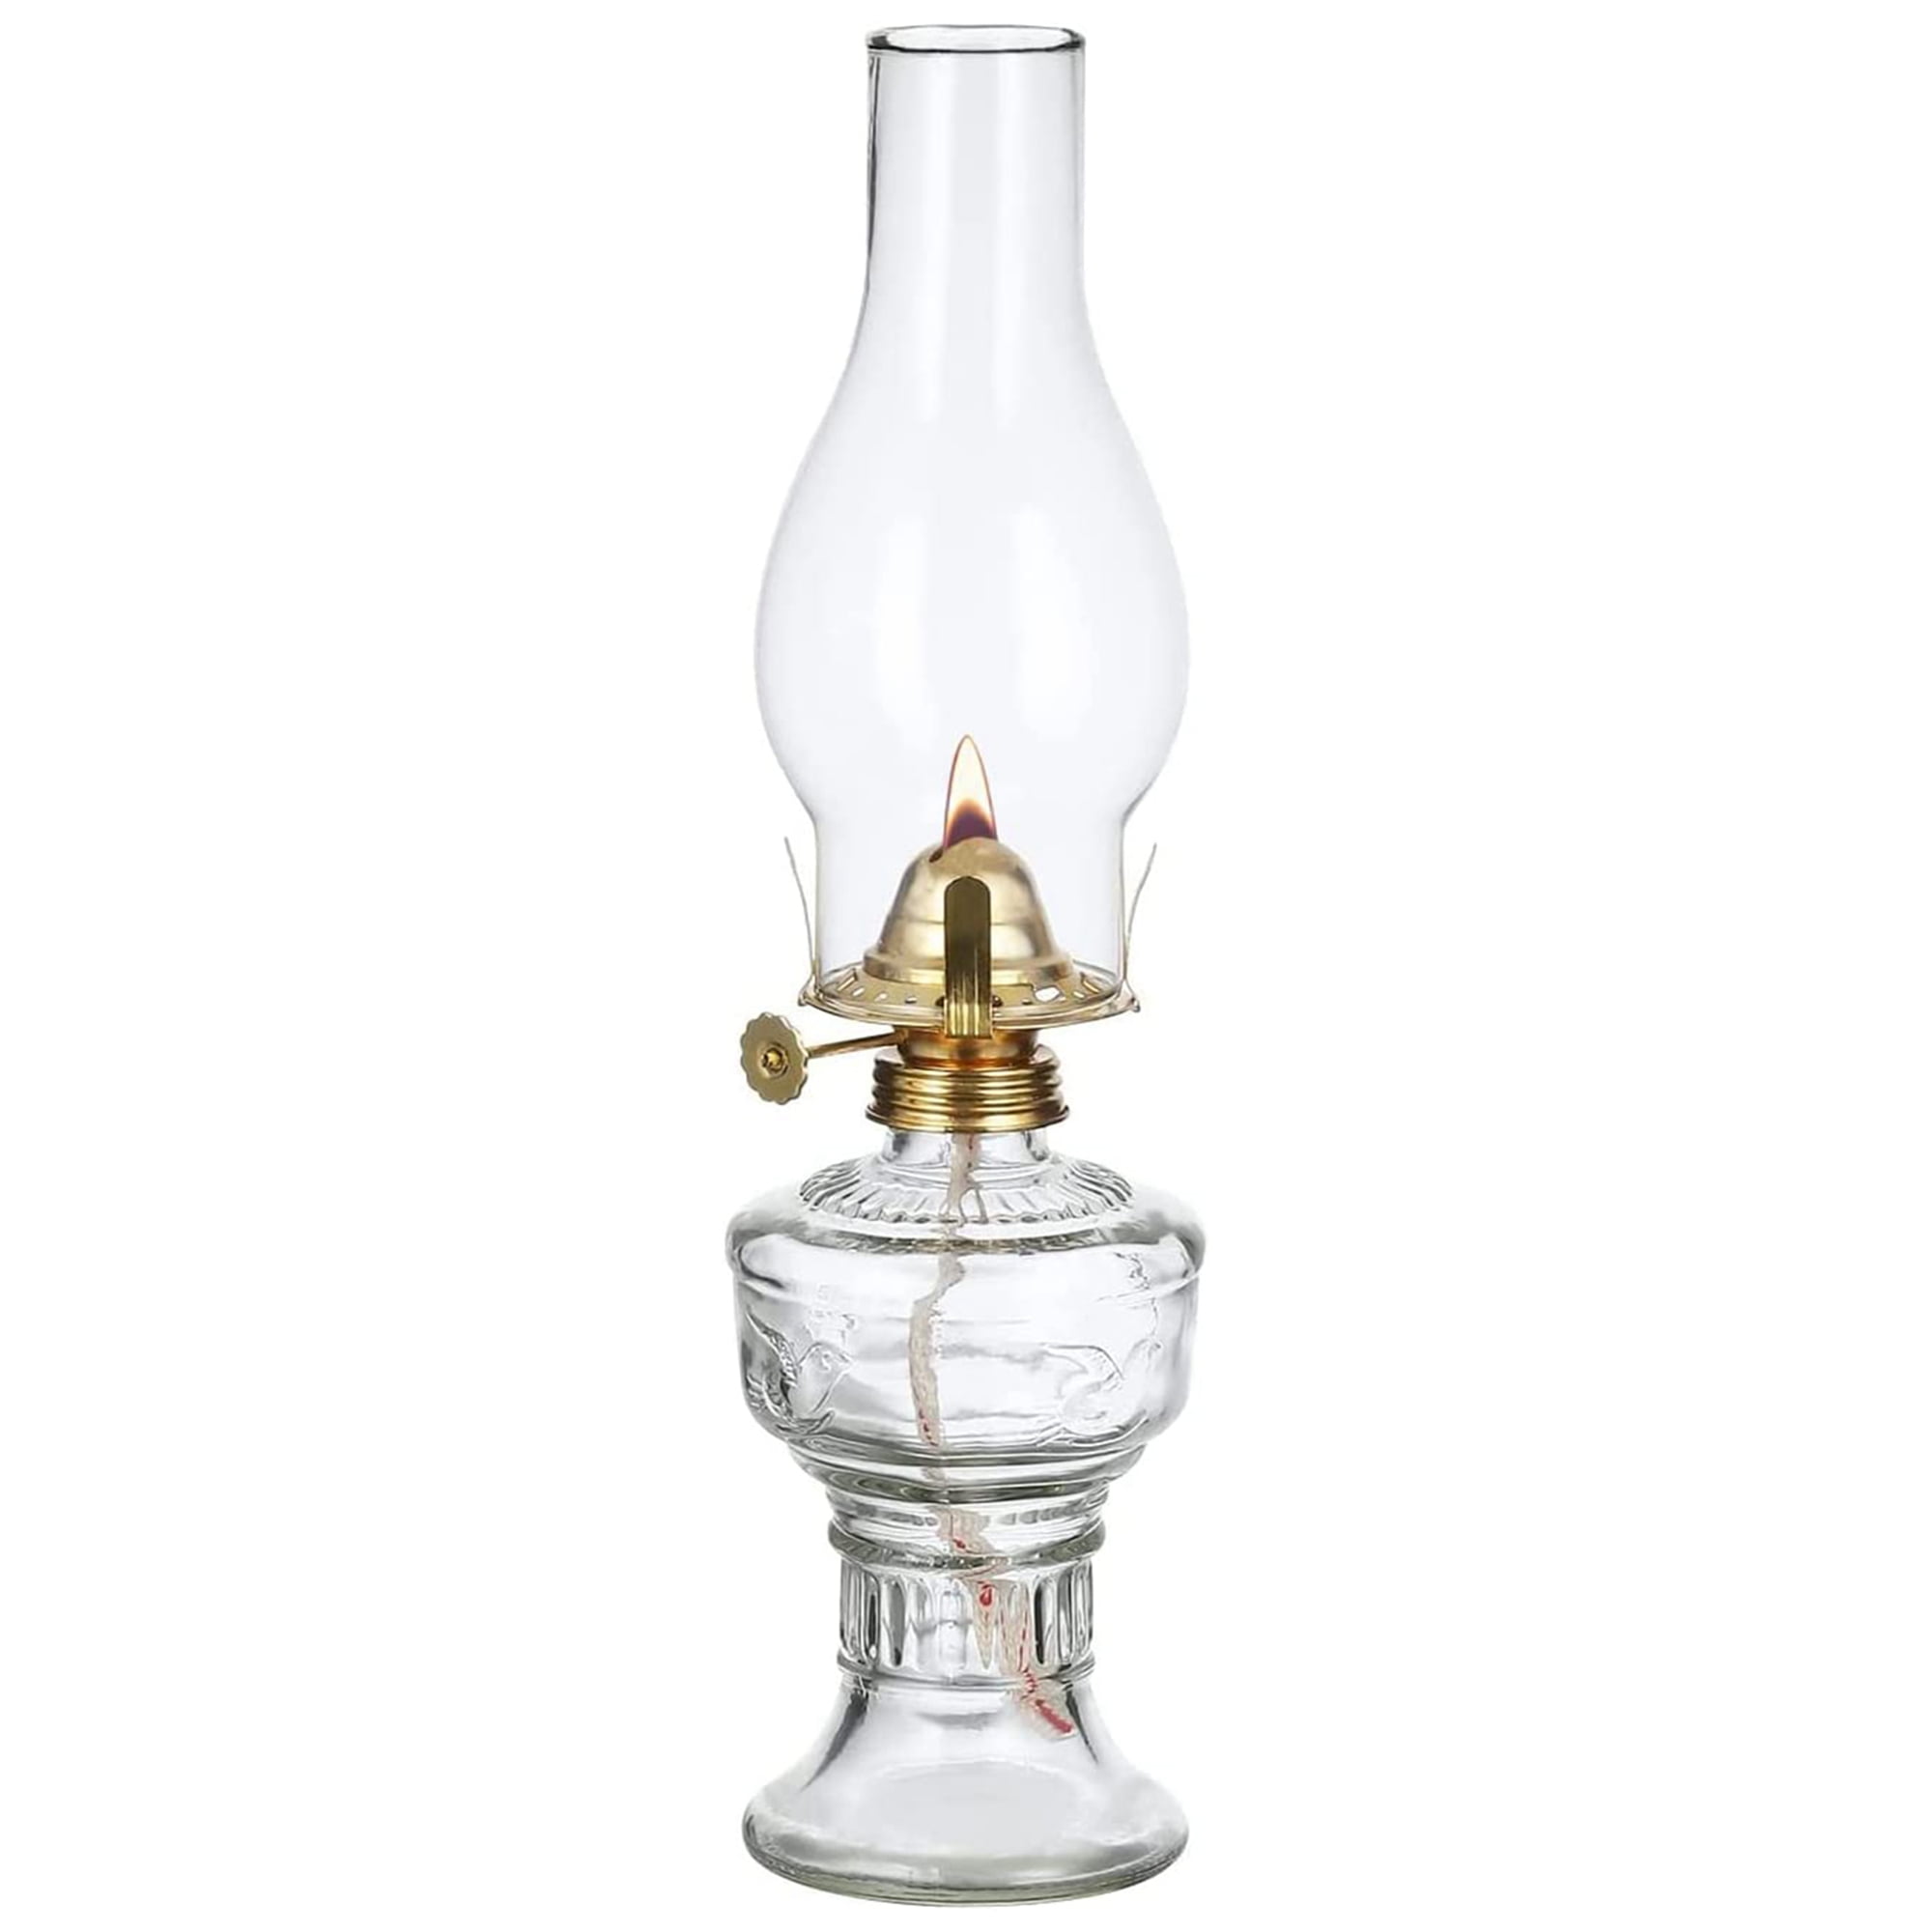 Spuik Oil Lamp Lantern Metal Glass Oil Lamps for Indoor Use Warm Home Mood  Decor Lighting Kerosene Lamp with Handle Chamber Oil Lamp Outdoor Camping